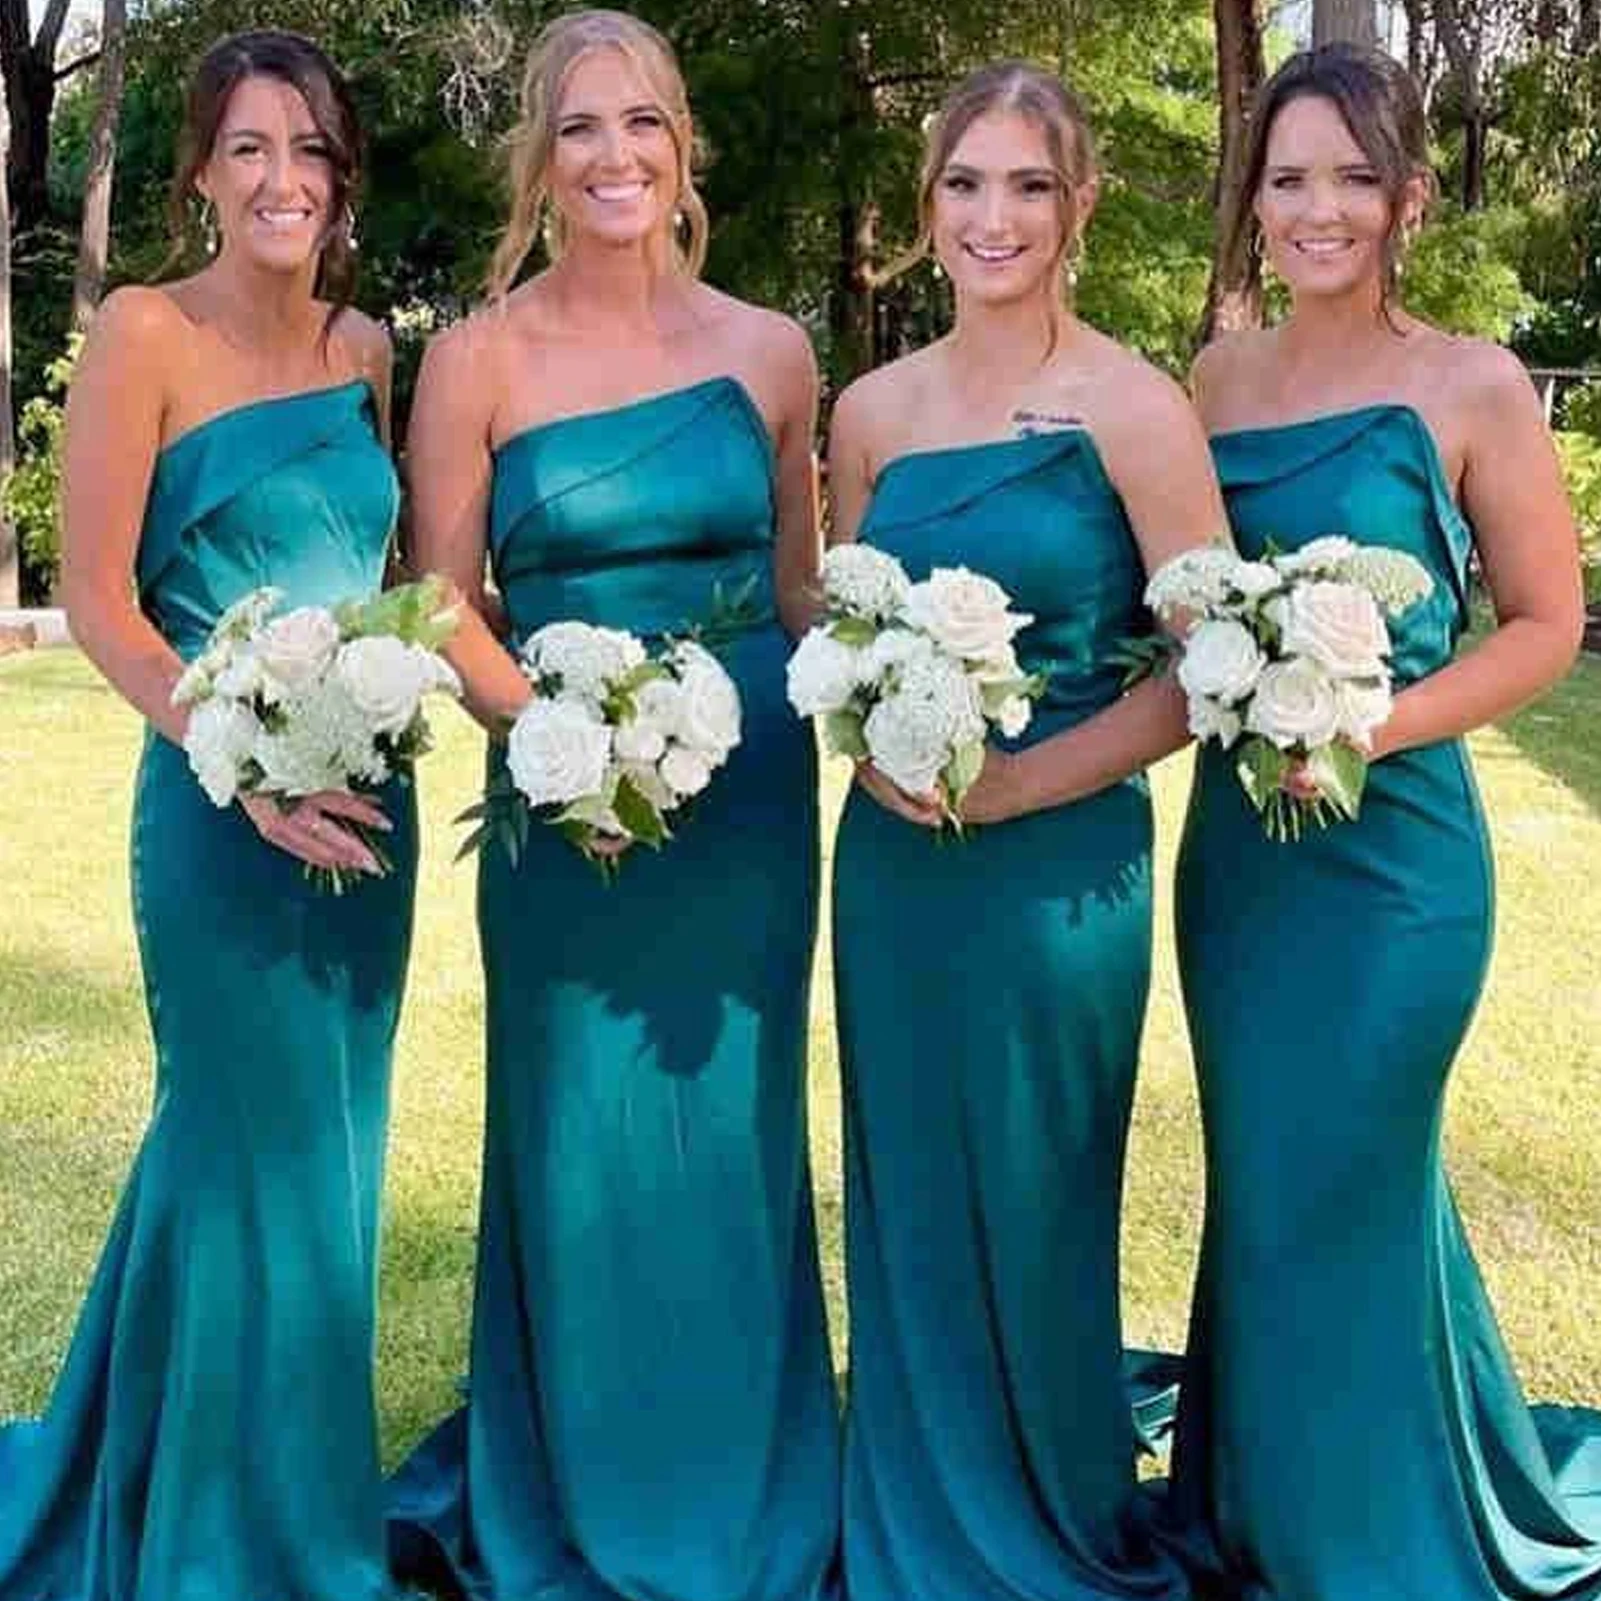 

Elegant Strapless Mermaid Wedding Party Dresses Sexy Sheath Satin Bridesmaid Dress Backless Sweep Train Maid Of Honor Gown